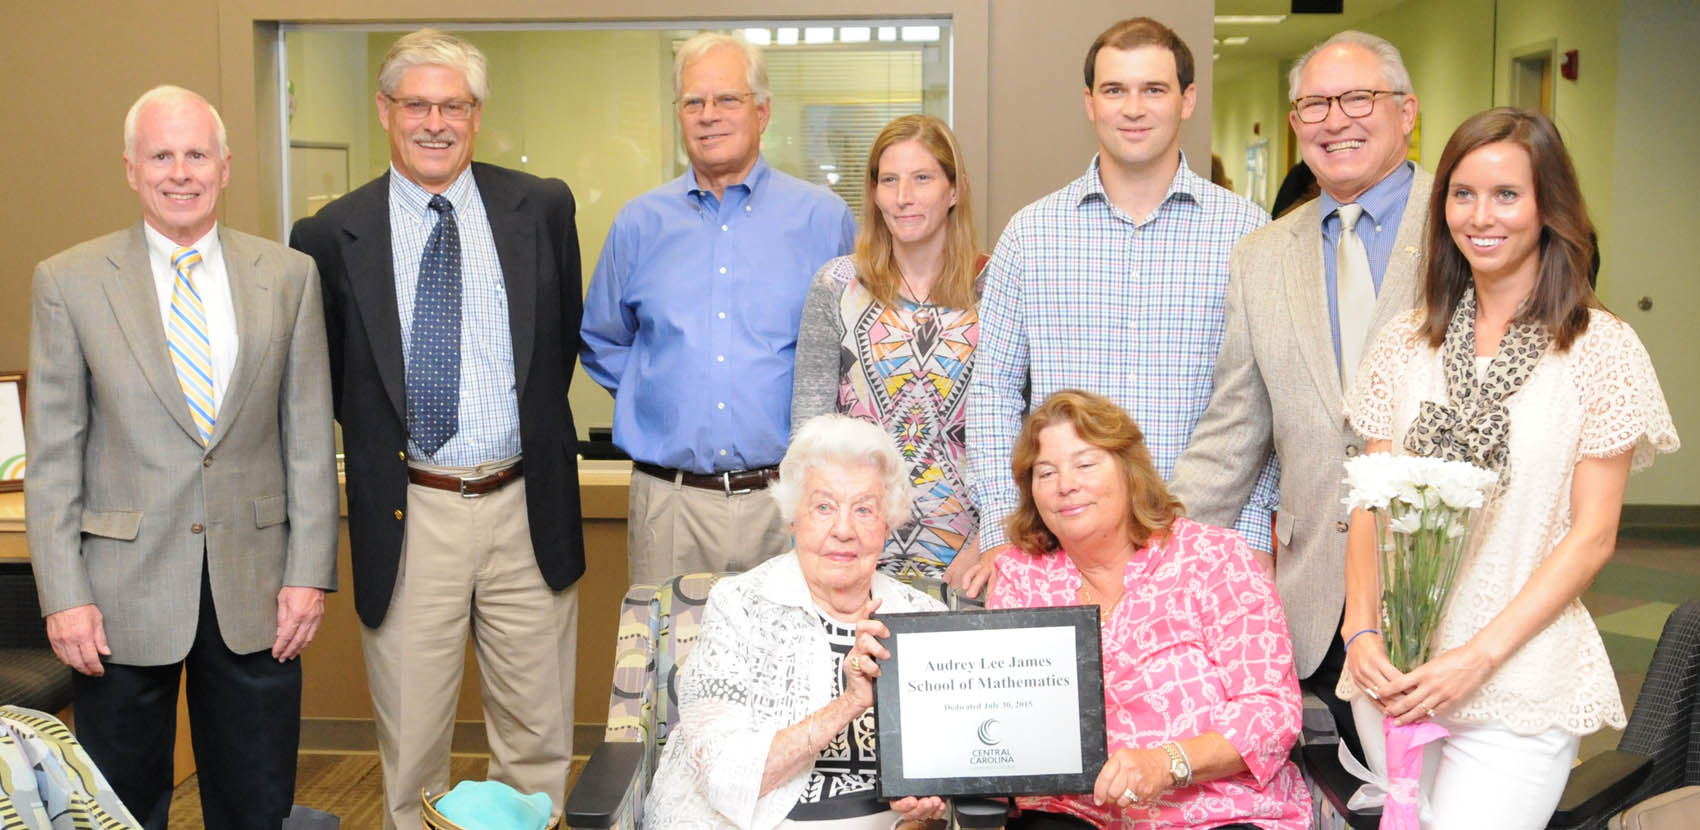 CCCC math program honors legacy of Audrey James